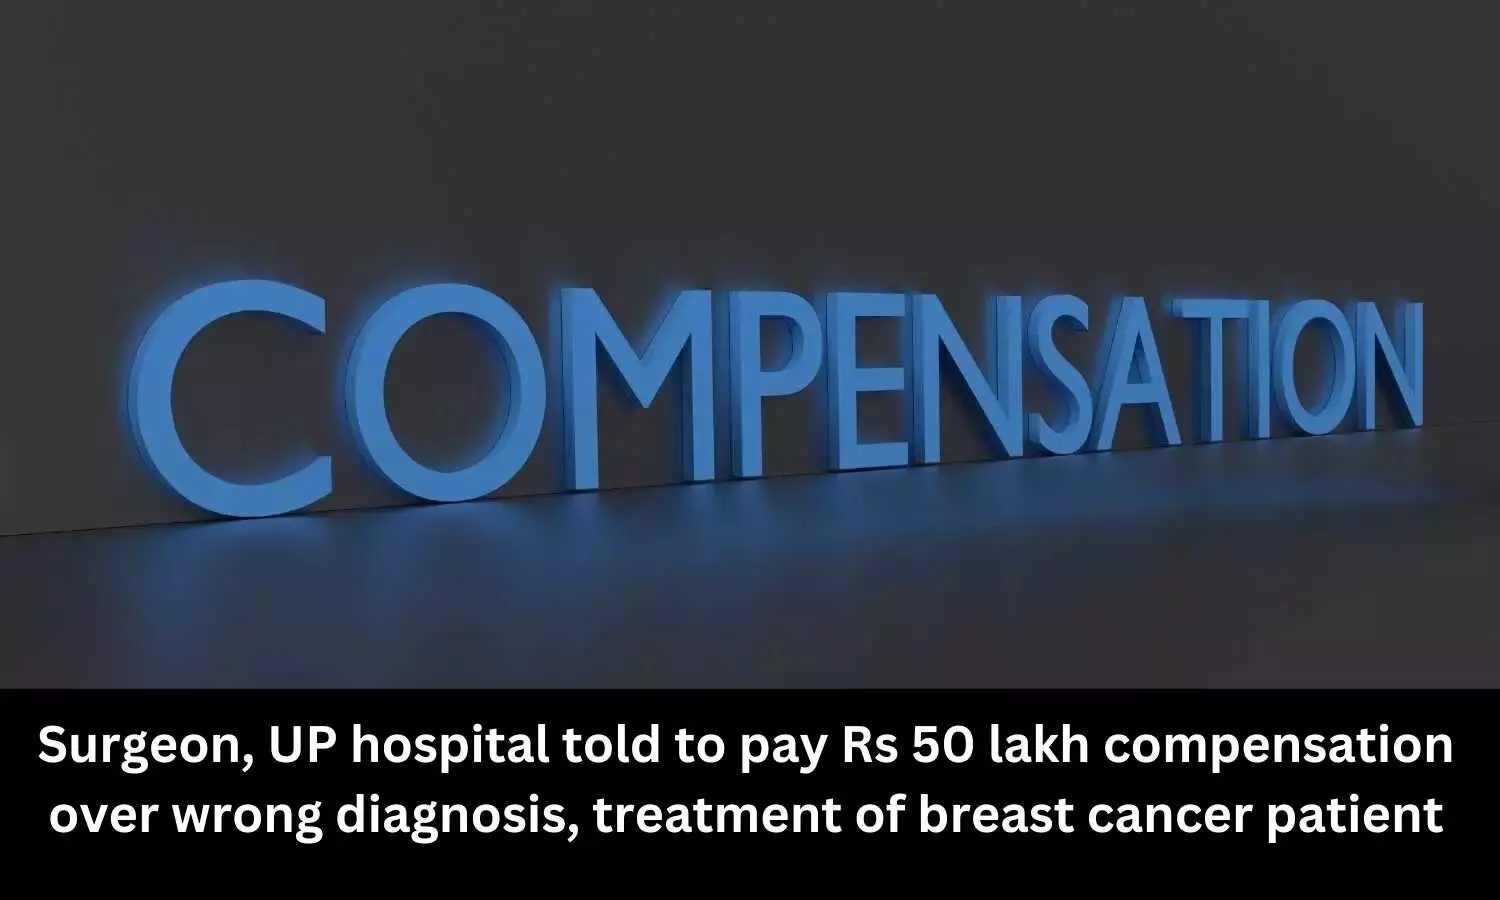 Wrong diagnosis, treatment of breast cancer patient: UP Hospital, surgeon told to pay Rs 50 lakh compensation